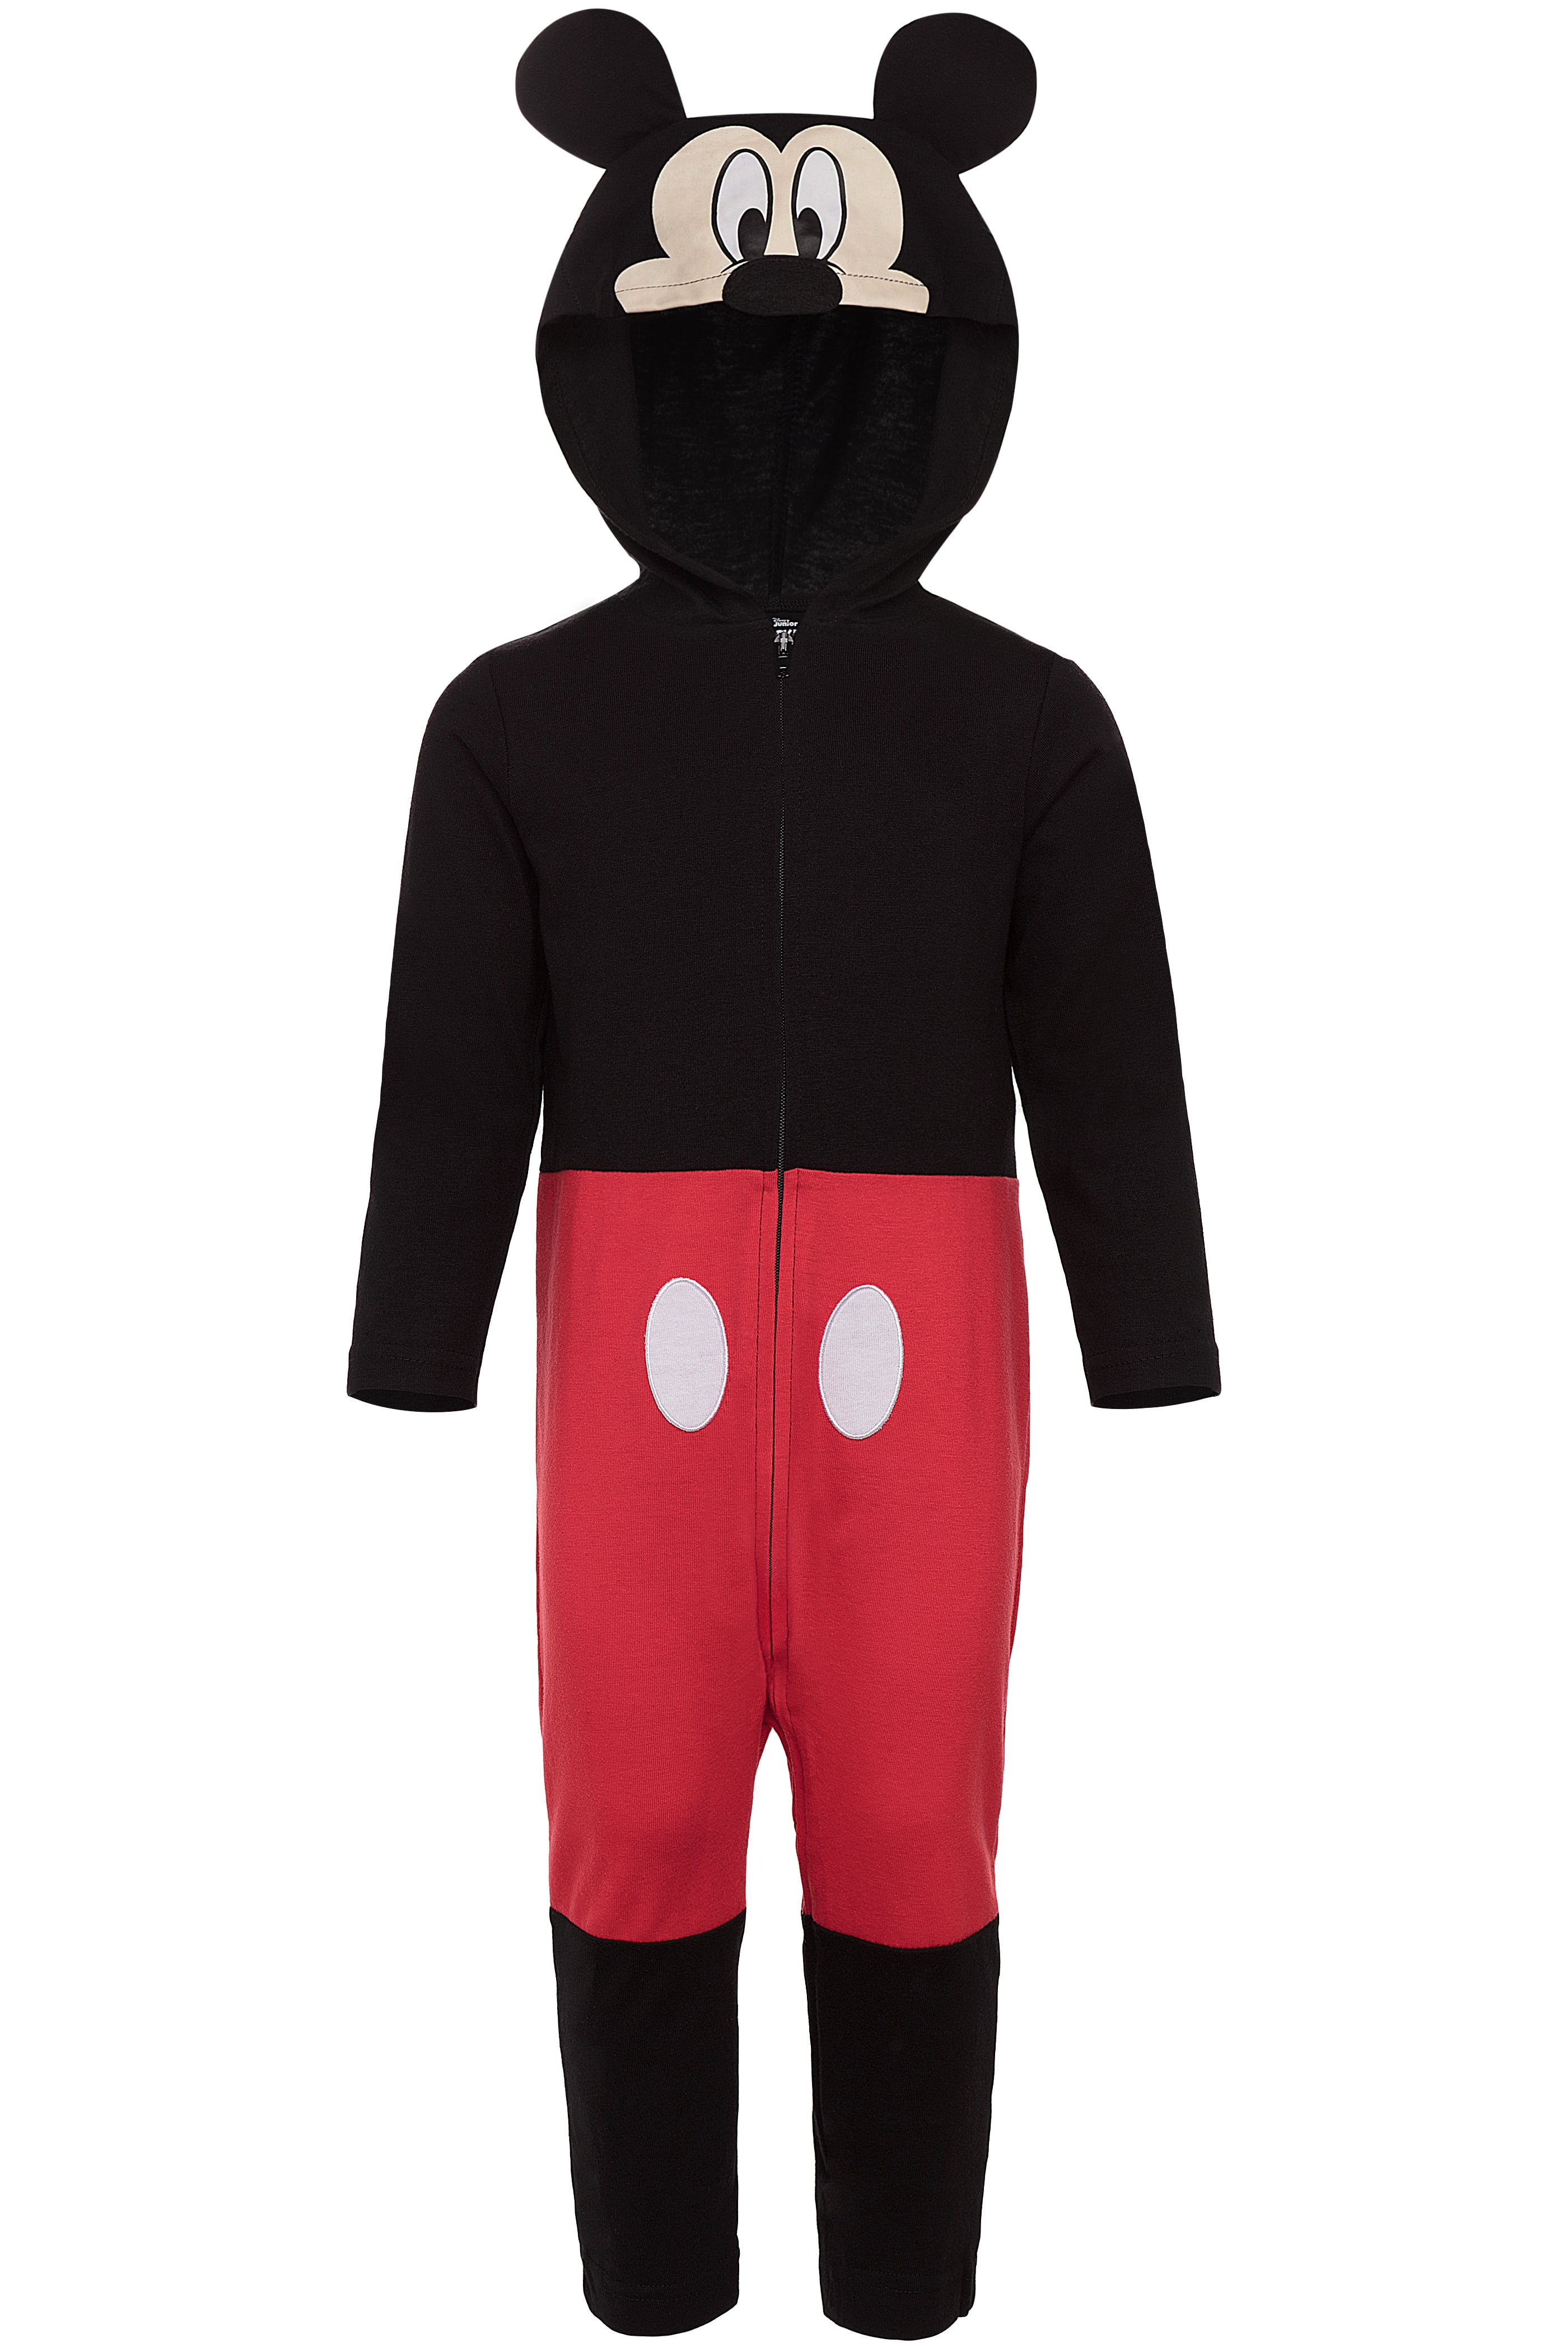 Disney Baby Boys Mickey Mouse One Piece Hooded Footless Romper Jumpsuit Newborn and Infant